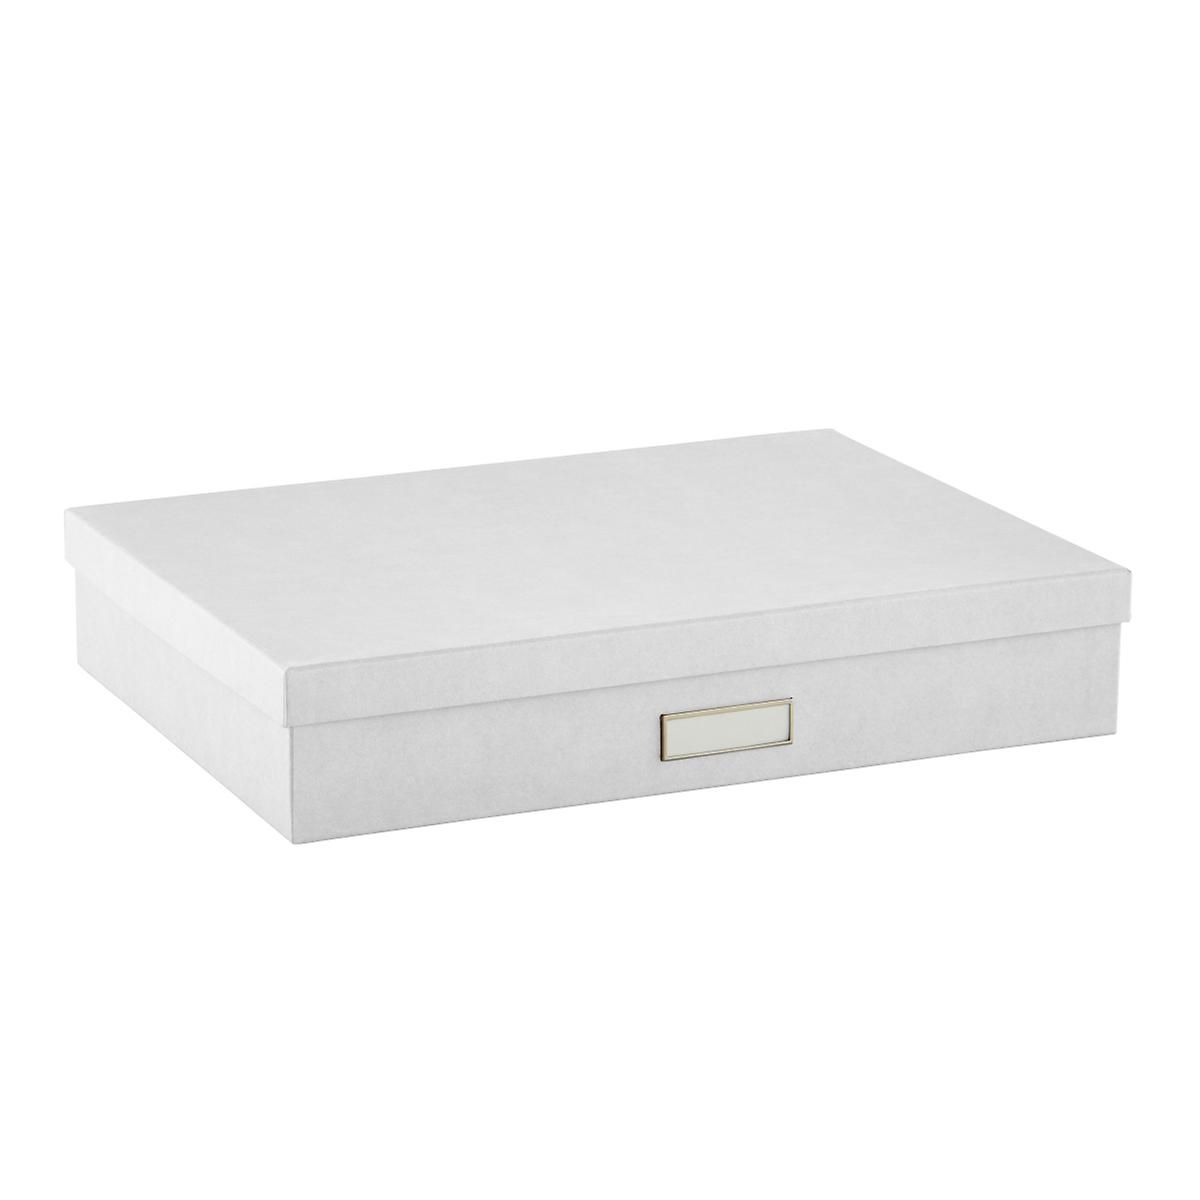 Bigso Light Grey Stockholm Office Storage Boxes | The Container Store